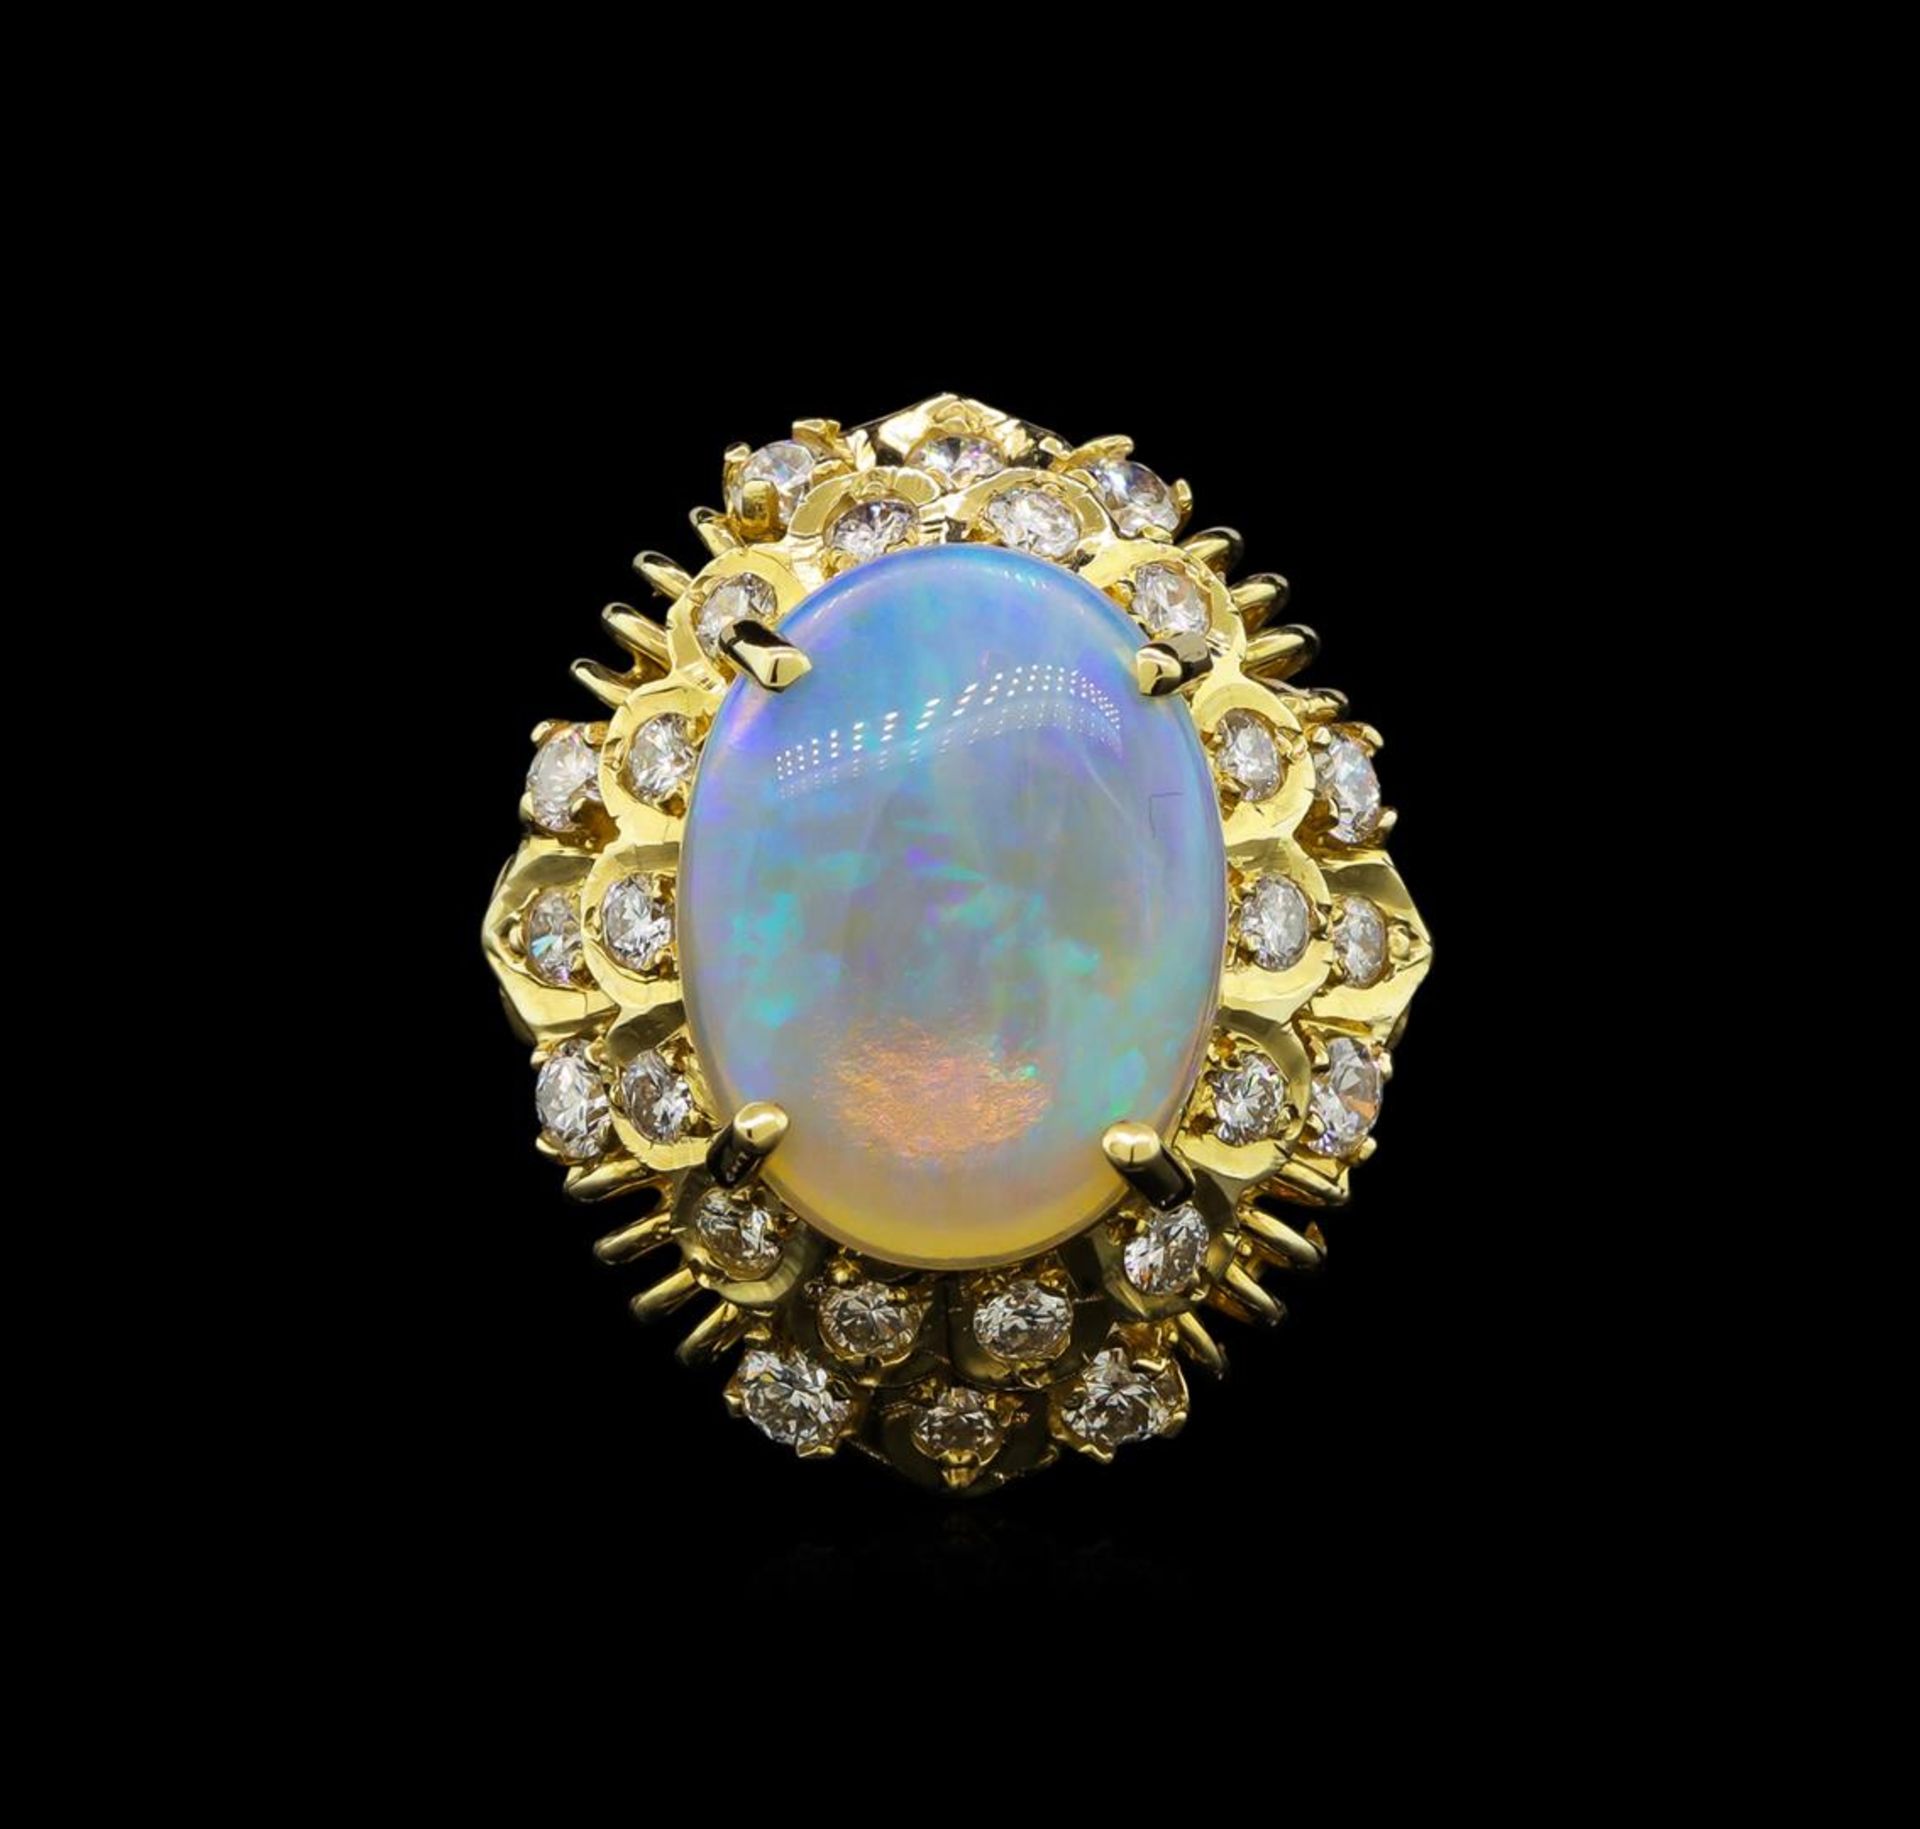 14KT Yellow Gold 3.68 ctw Opal and Diamond Ring - Image 2 of 5